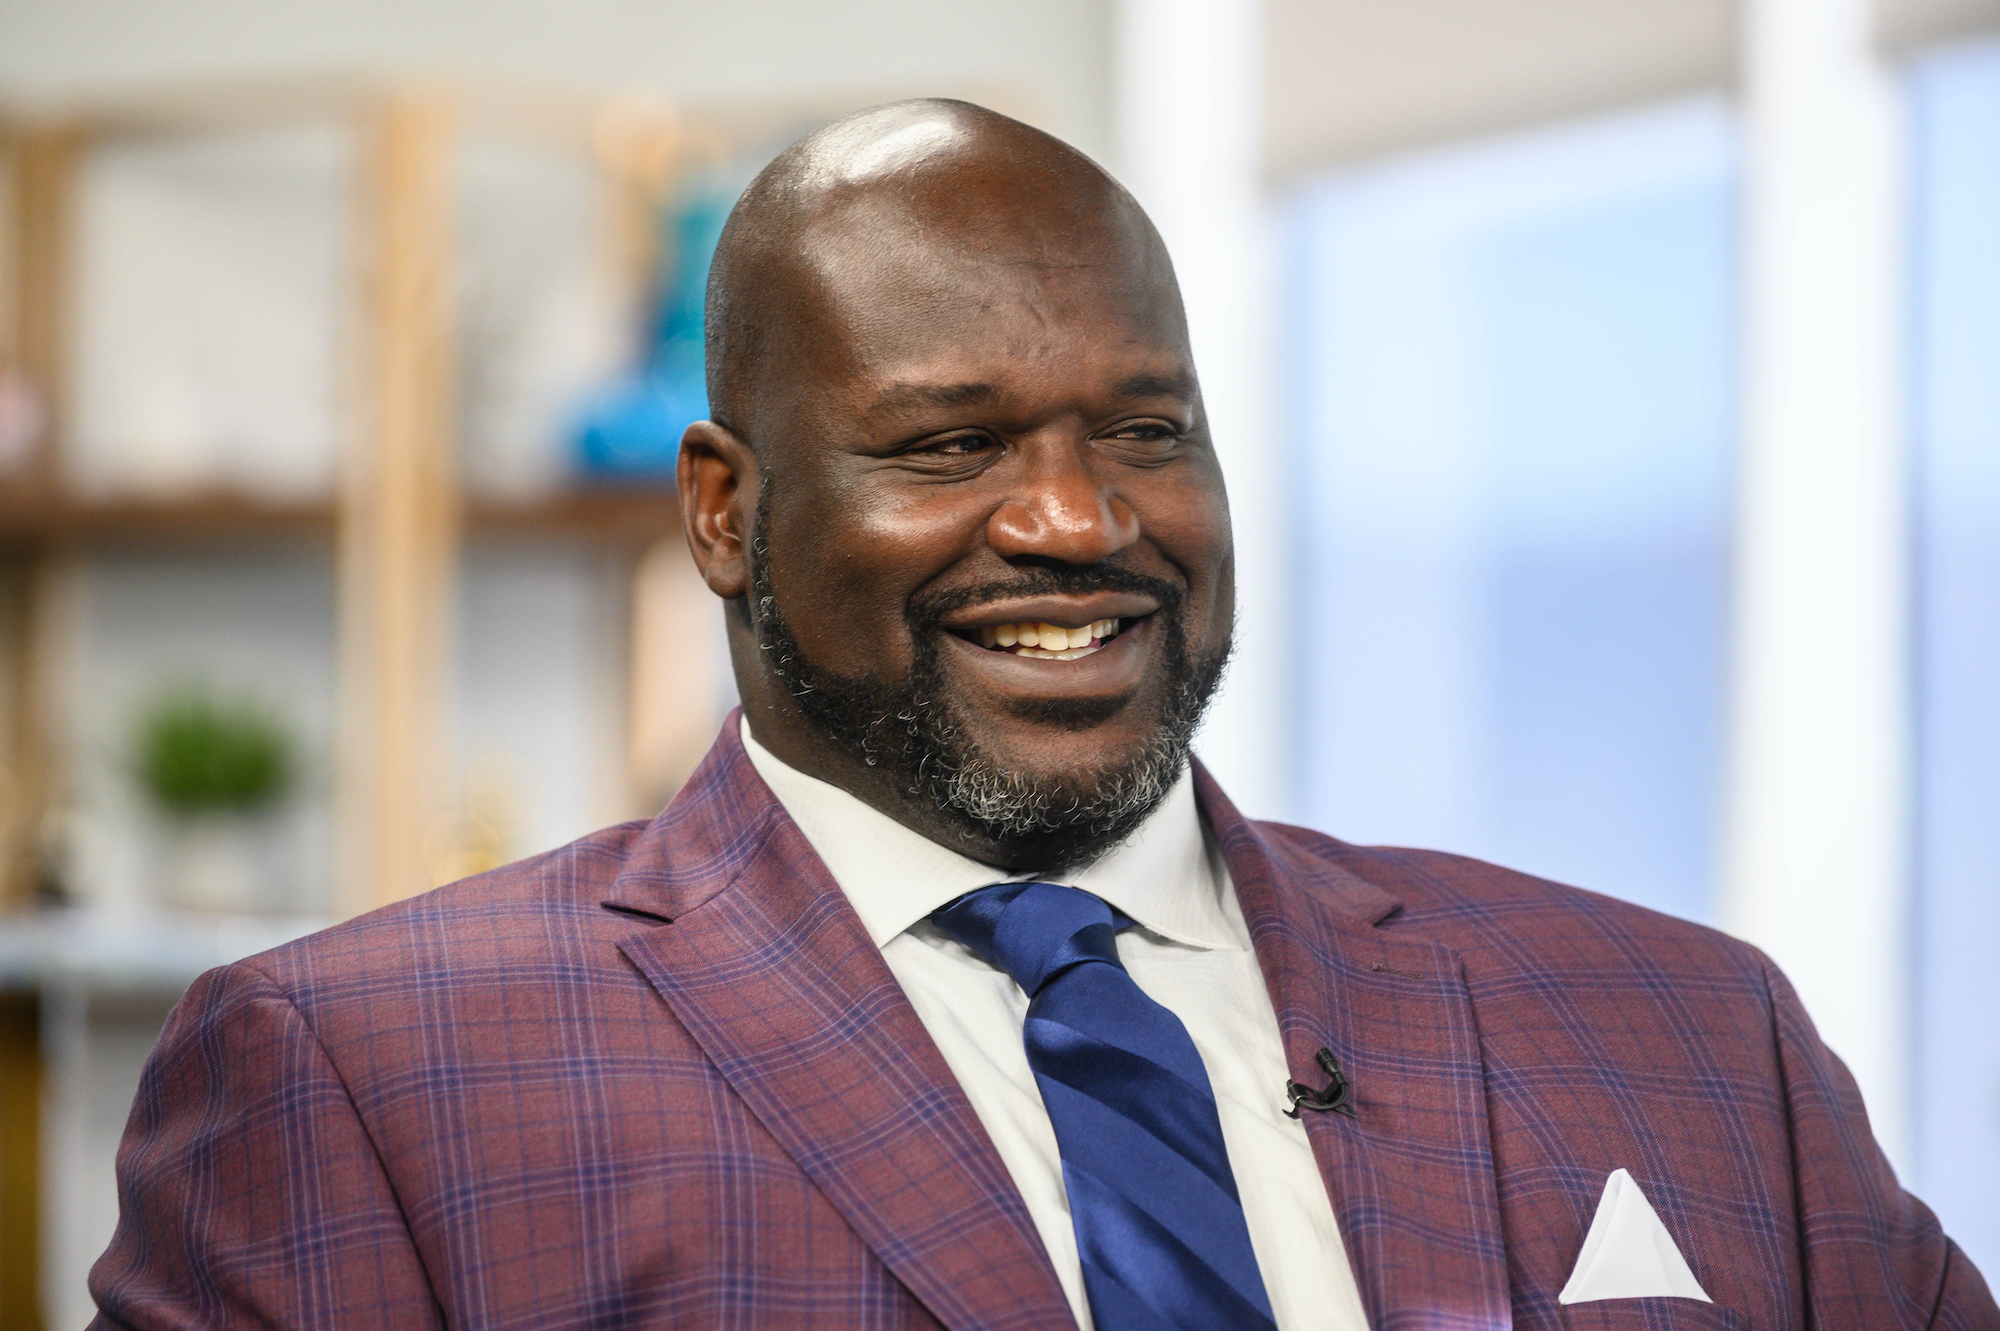 Shaquille O'Neal laughing, turned to the side